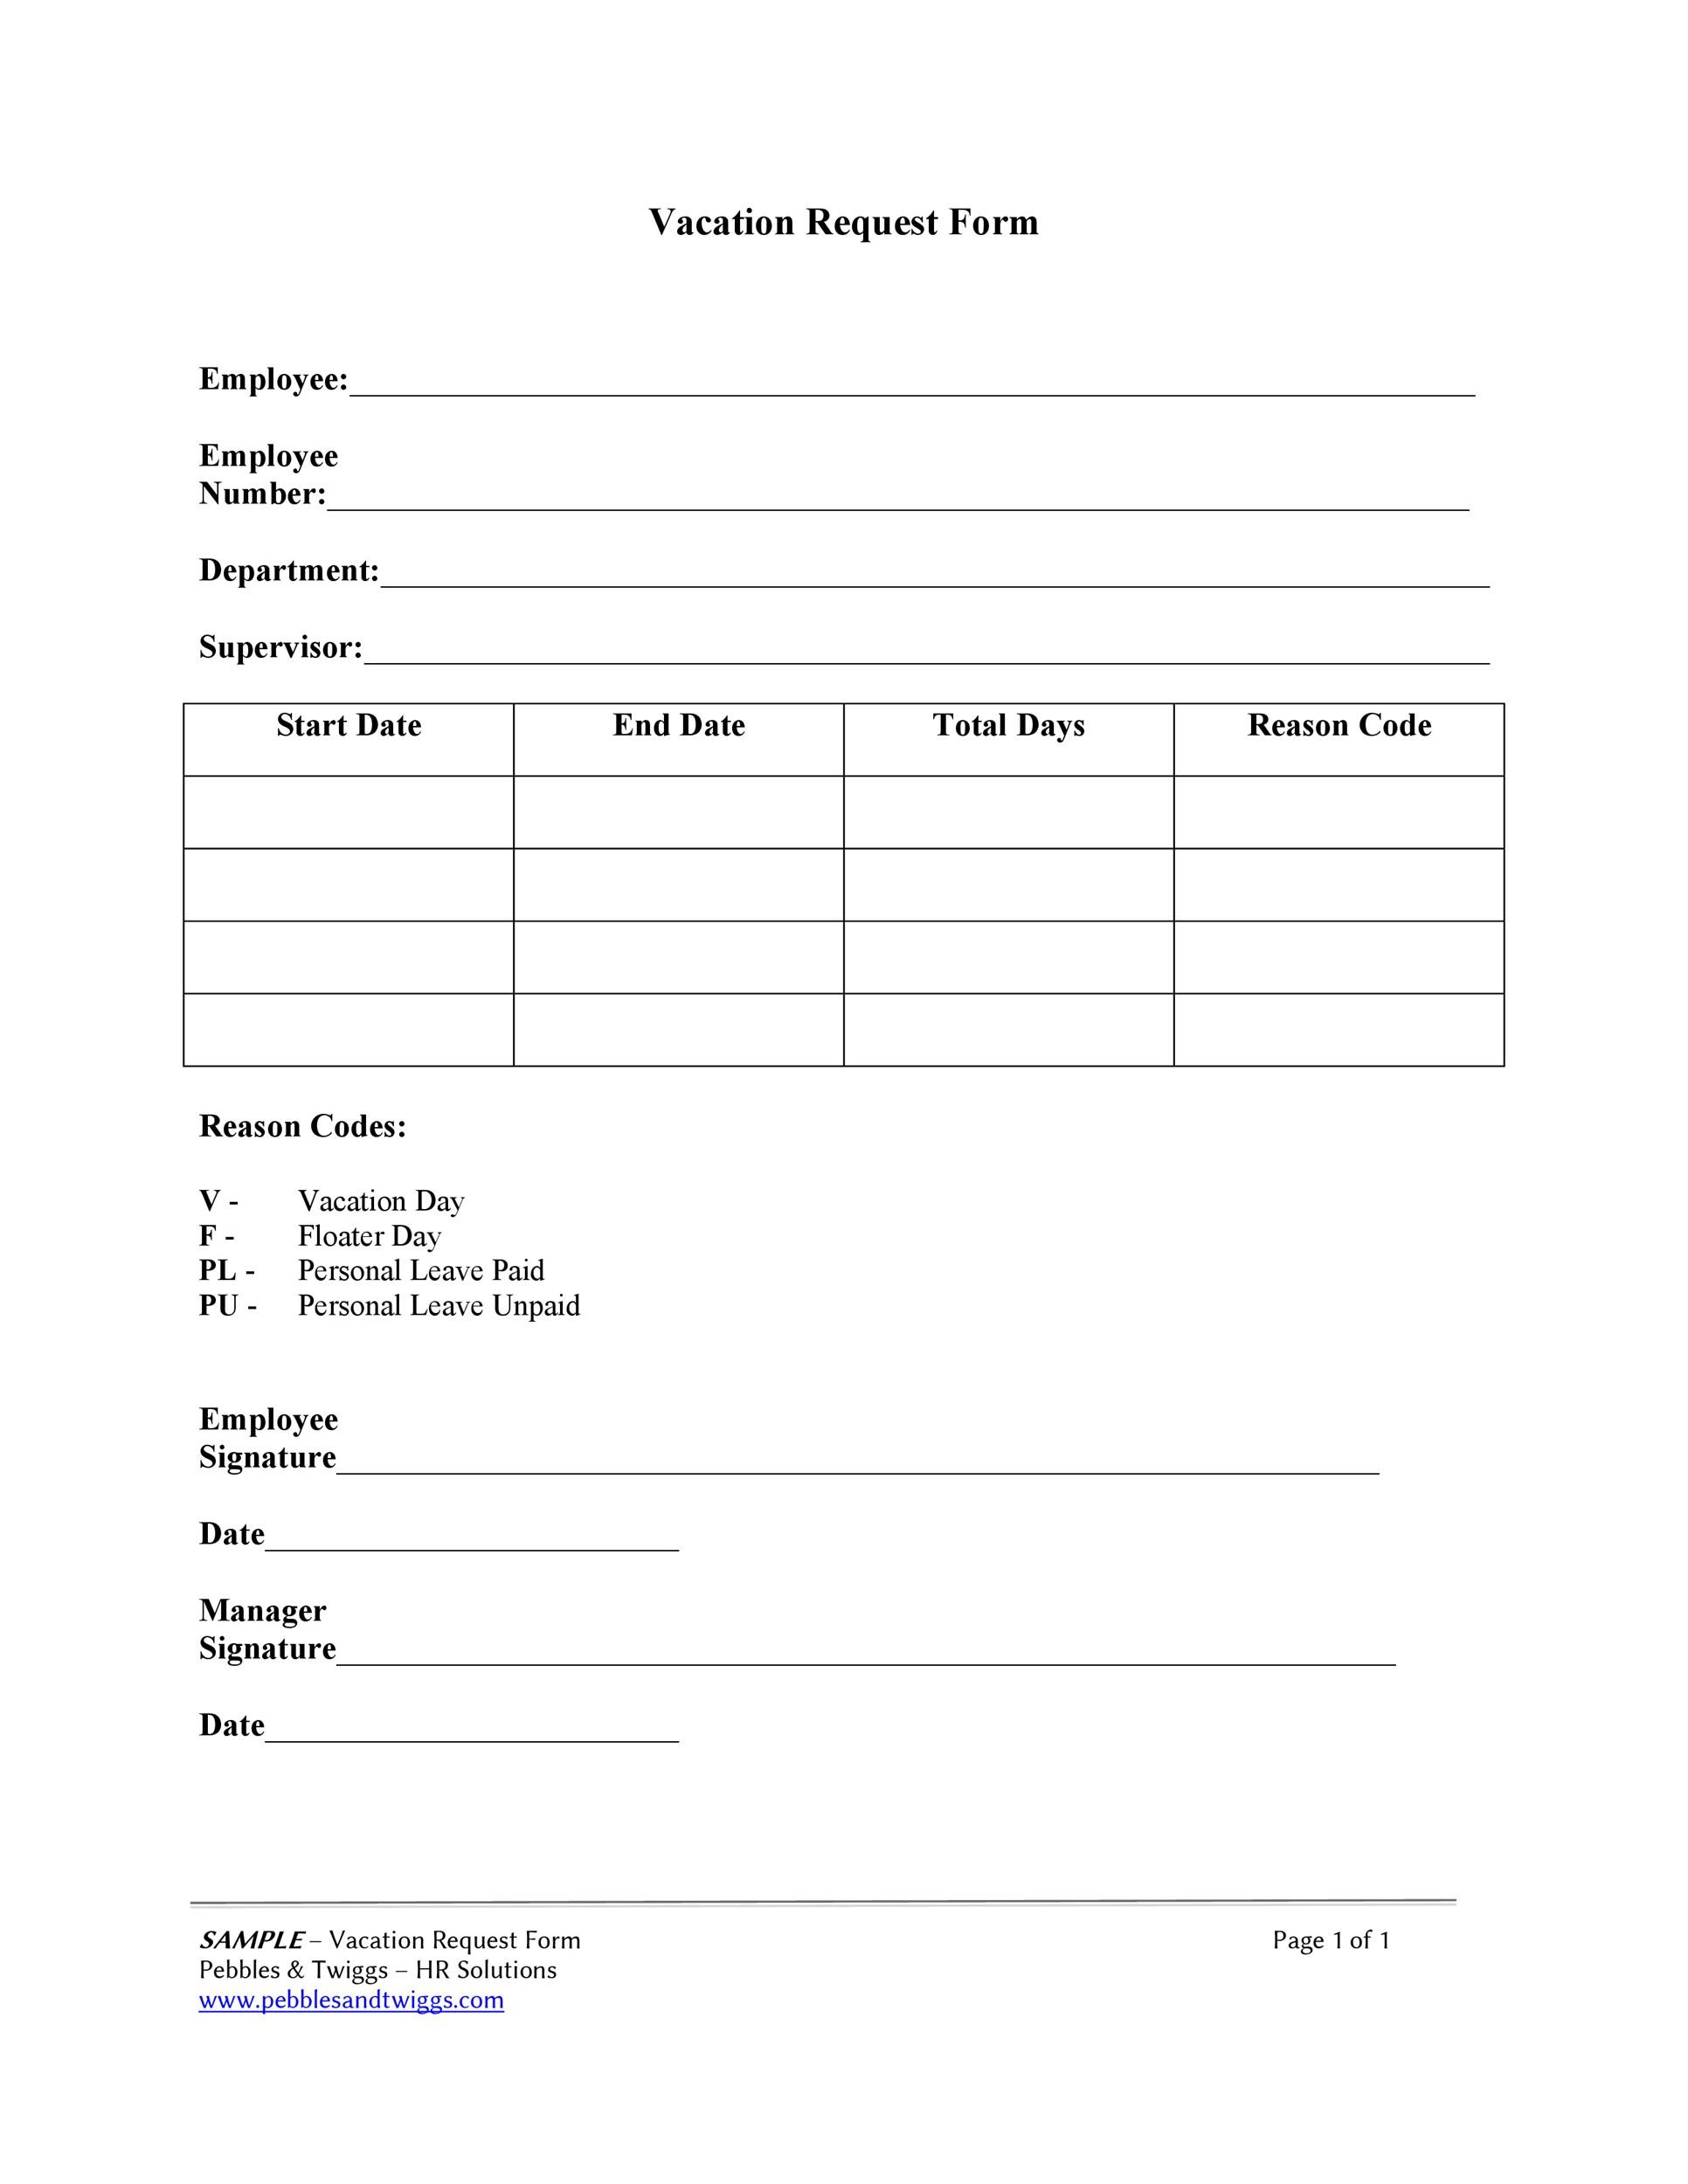 employee-request-form-template